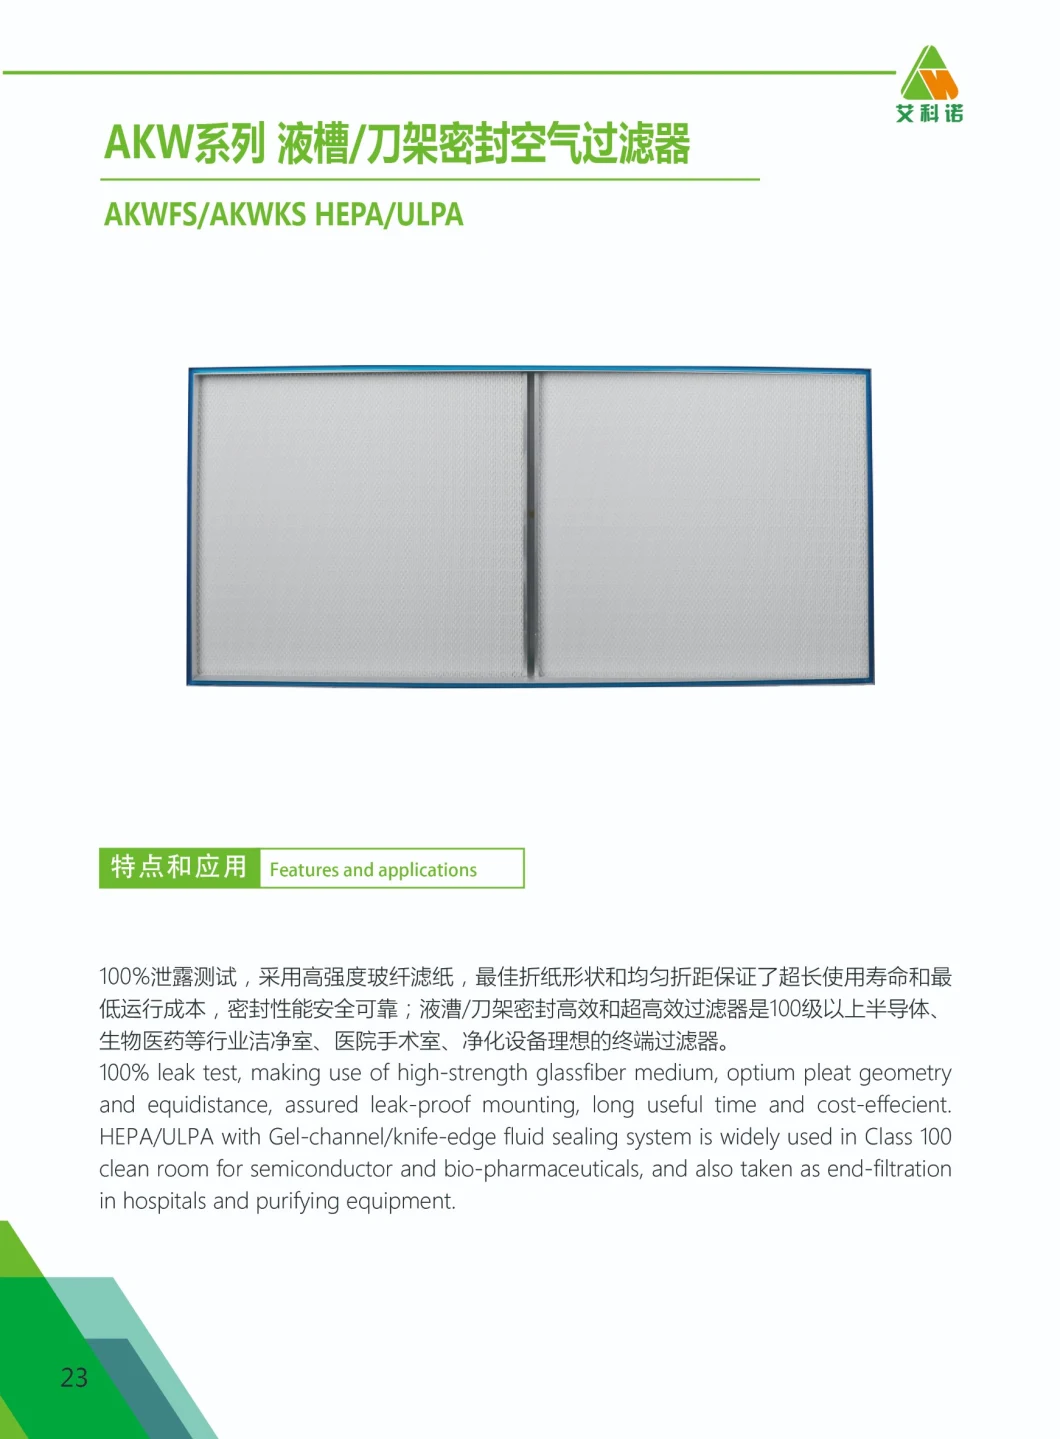 Mini-Pleat HEPA Filters Knife Edge/Gel Seal for Injection Pharmaceutical and Air Purifier